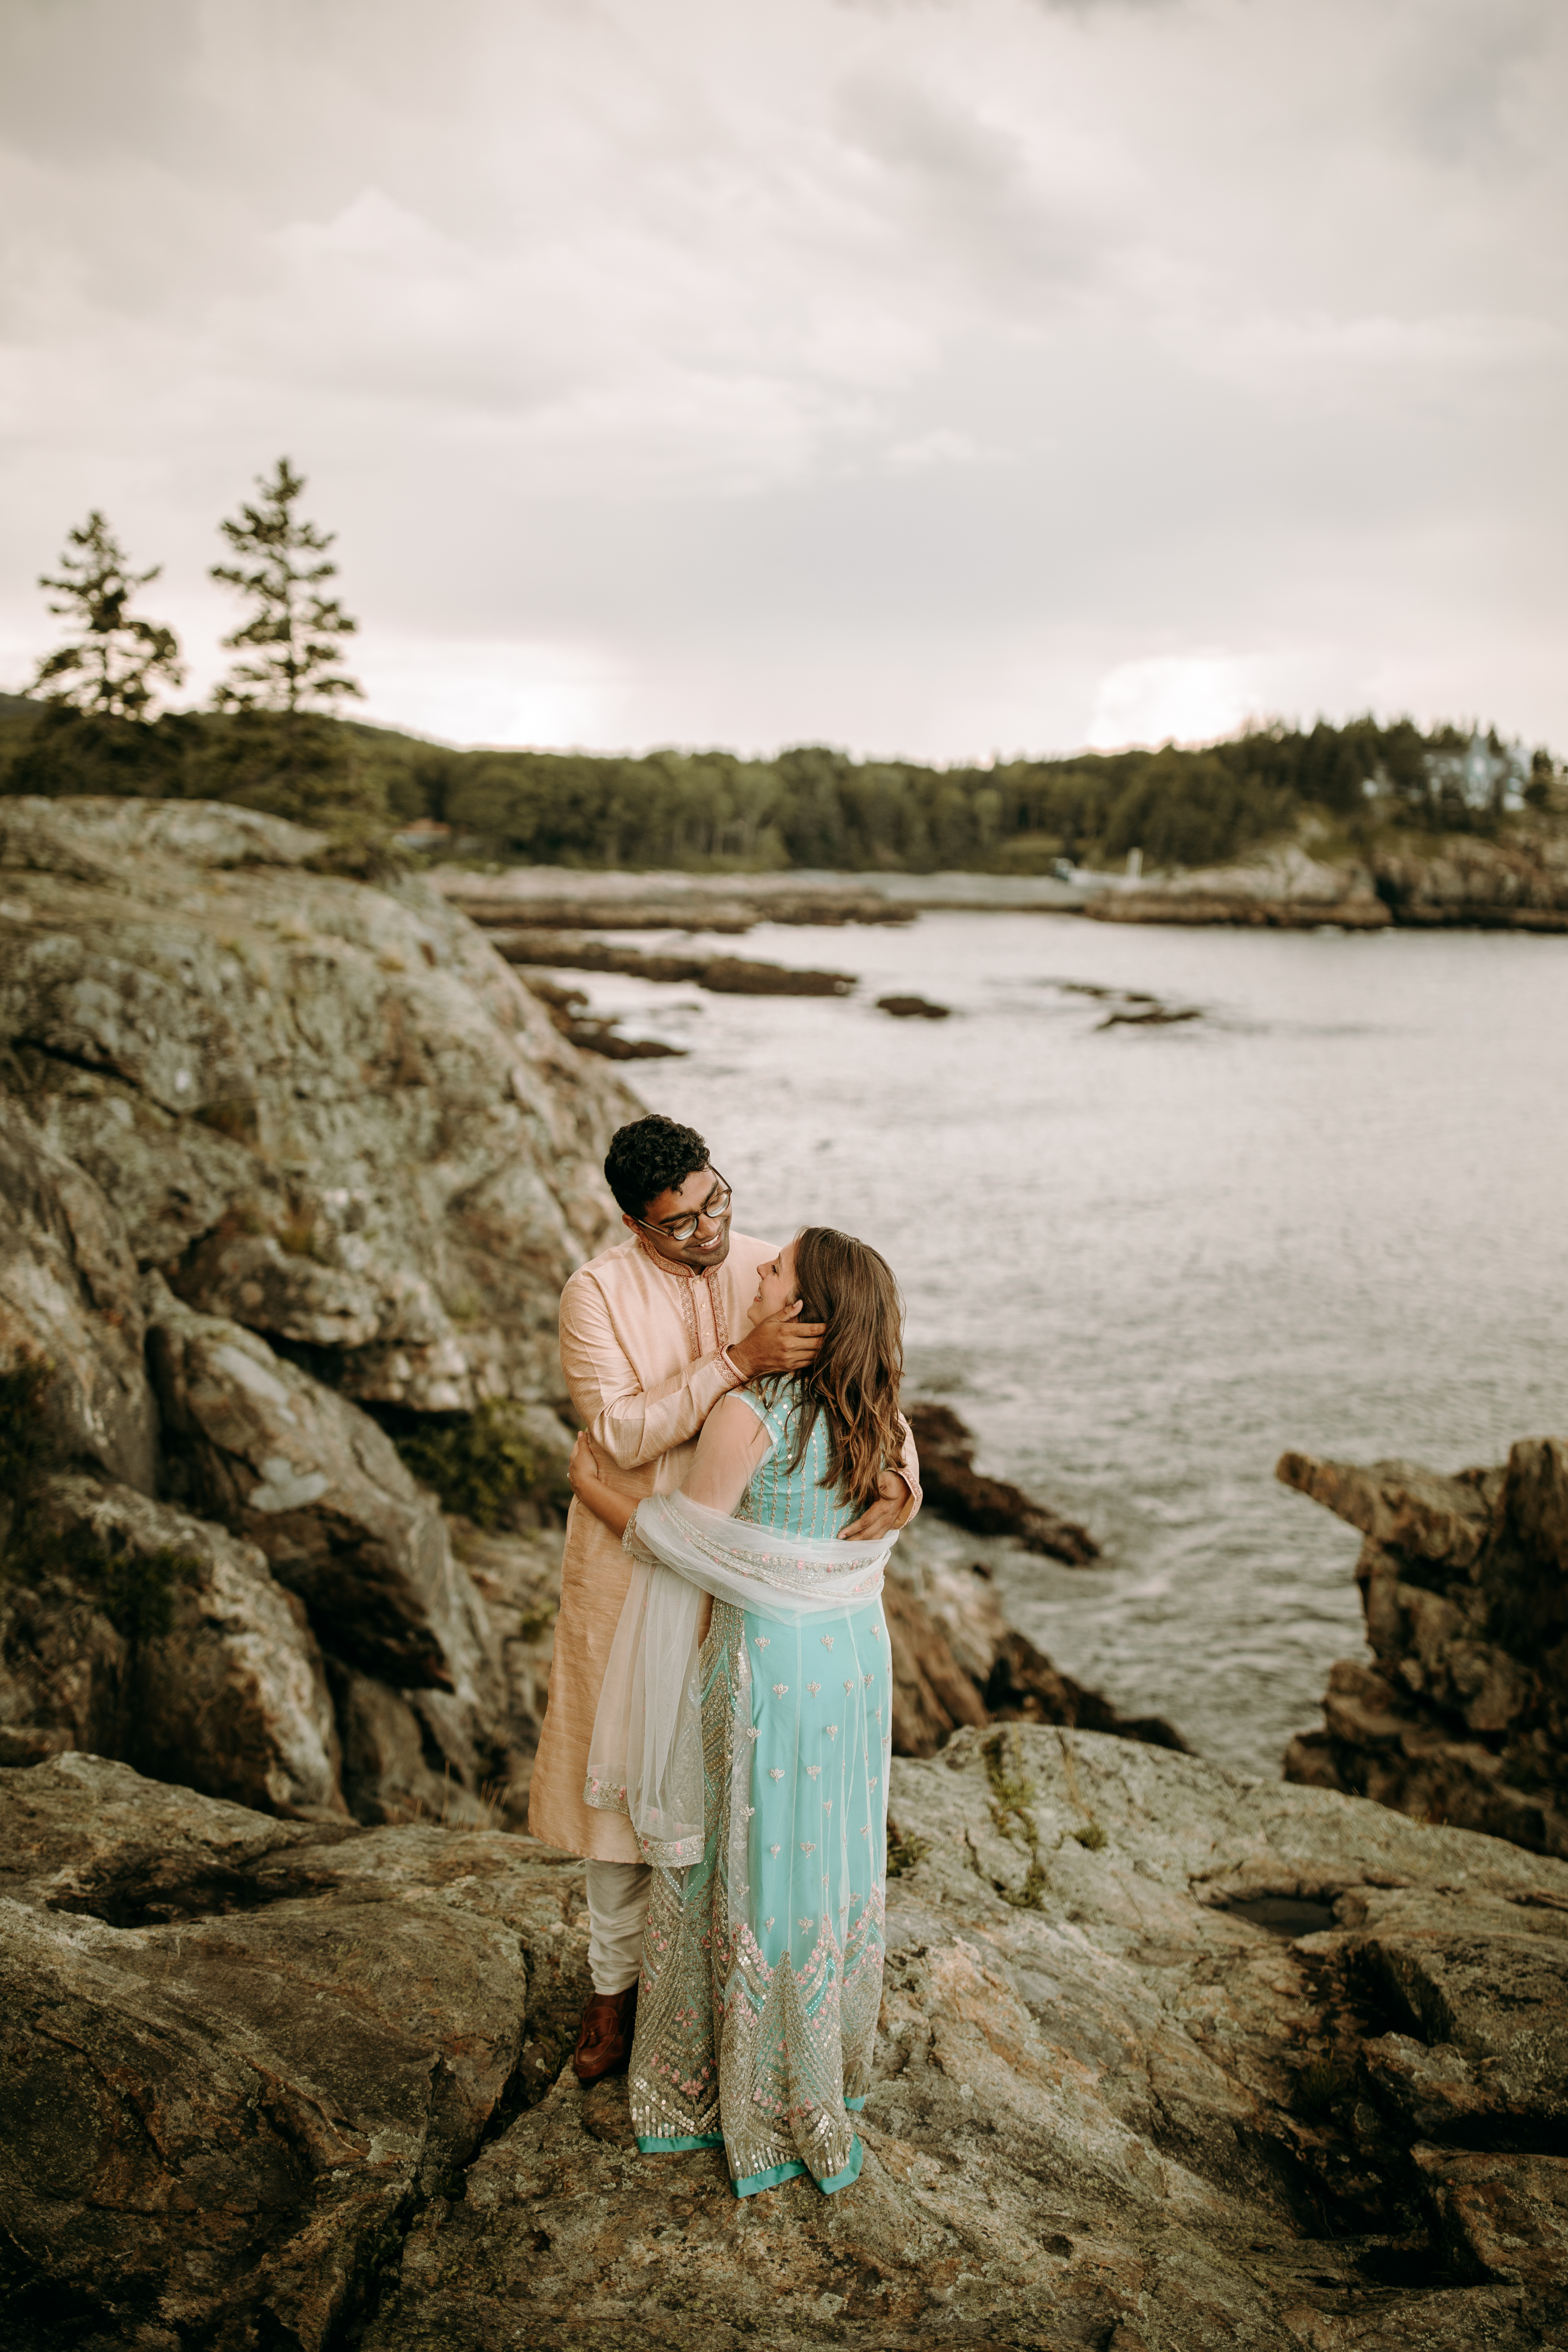 Cliff elopement photos on the coast of Maine at Acadia National Park by Schooner Head Point in traditional Indian dress bride and groom standing with ocean in the background in Bar Harbor Maine